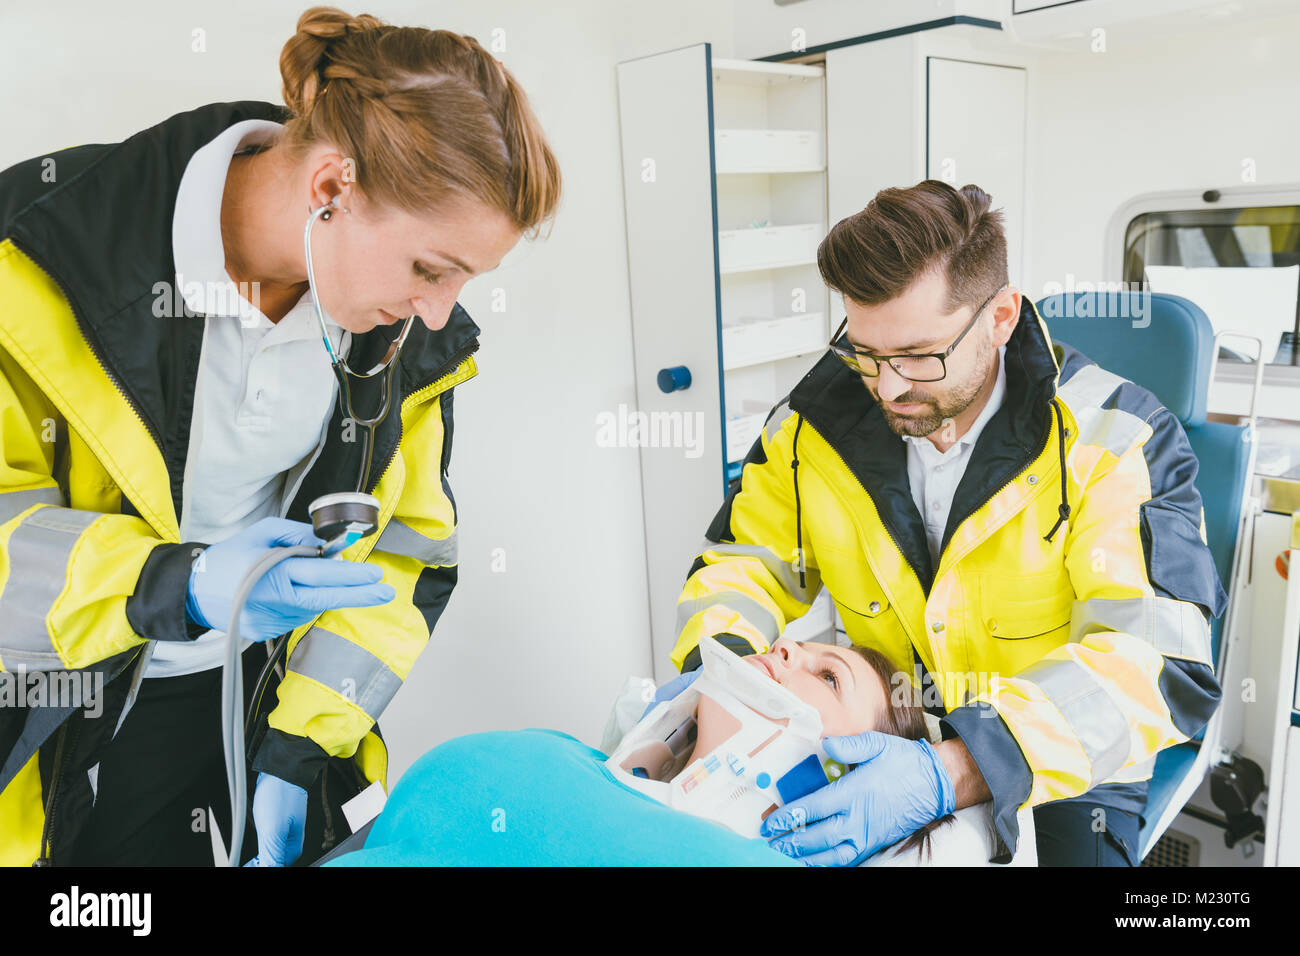 Medic taking care of injured woman with whiplash in ambulance Stock Photo